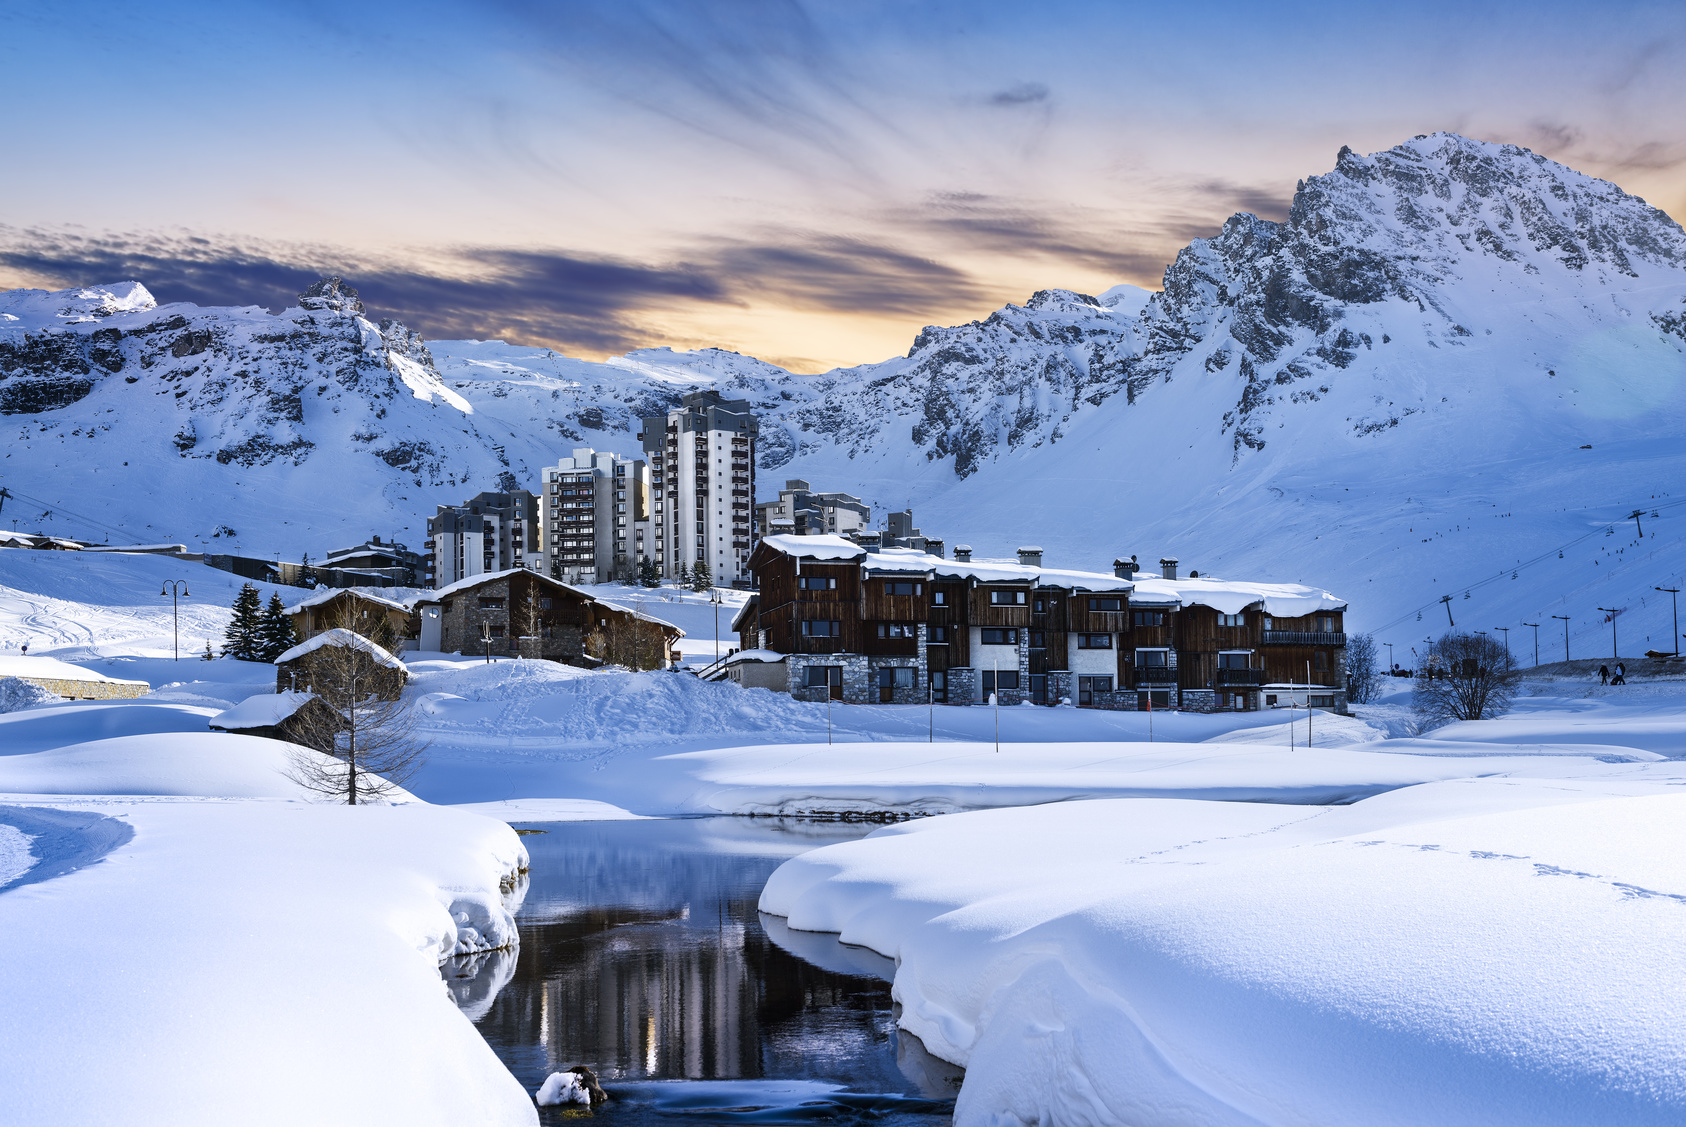 This is Why Intermediate Skiers are Heading to Tignes